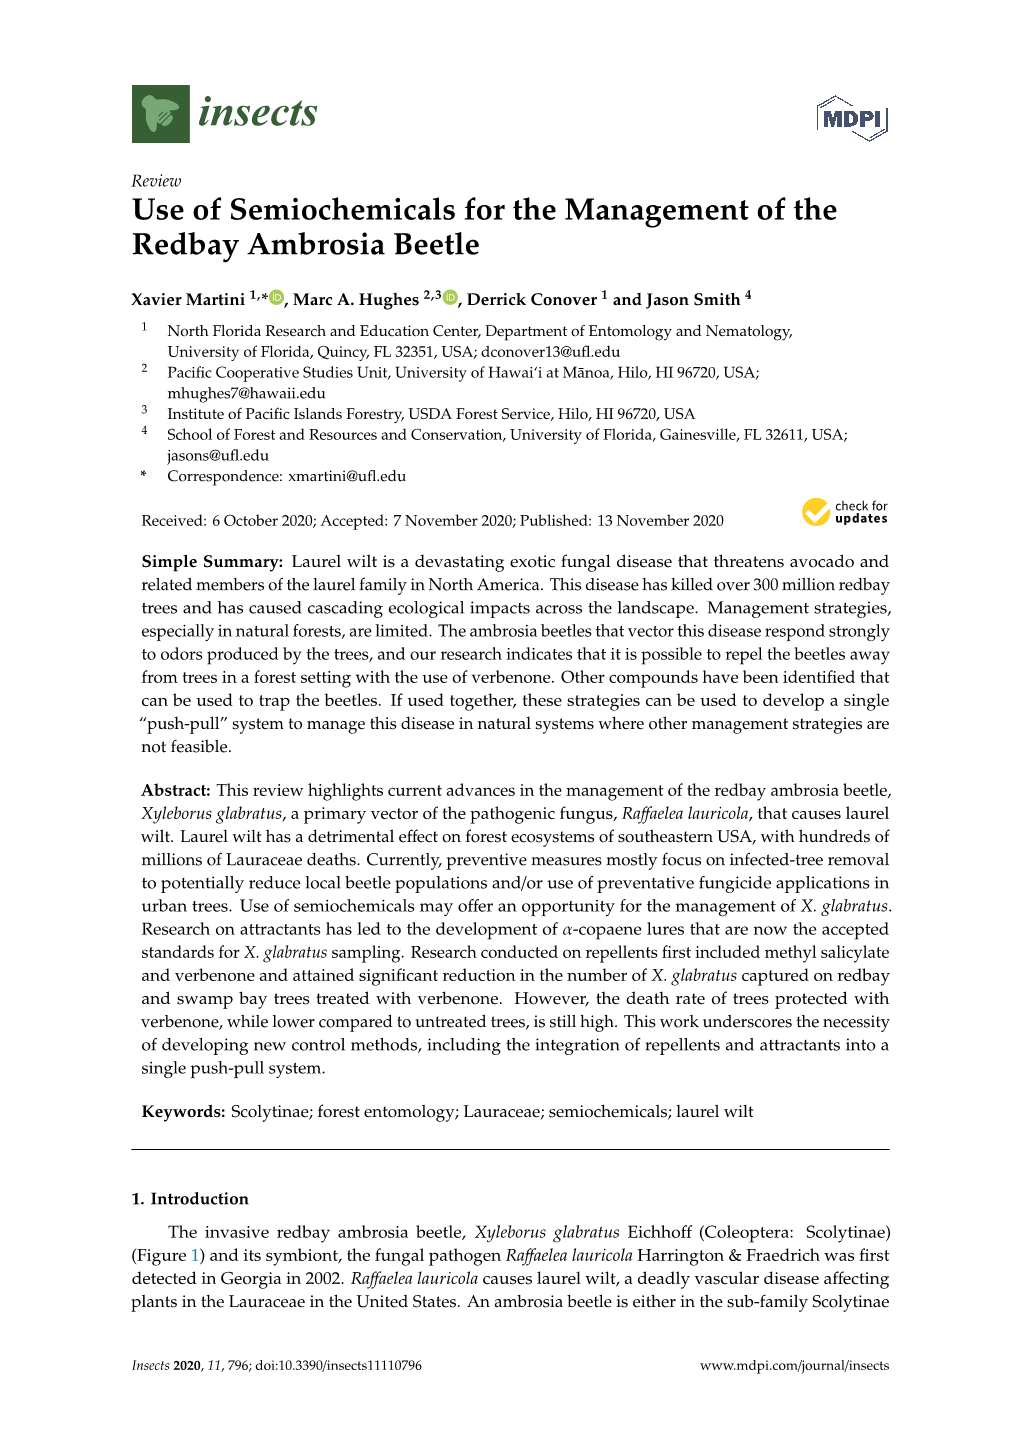 Use of Semiochemicals for the Management of the Redbay Ambrosia Beetle